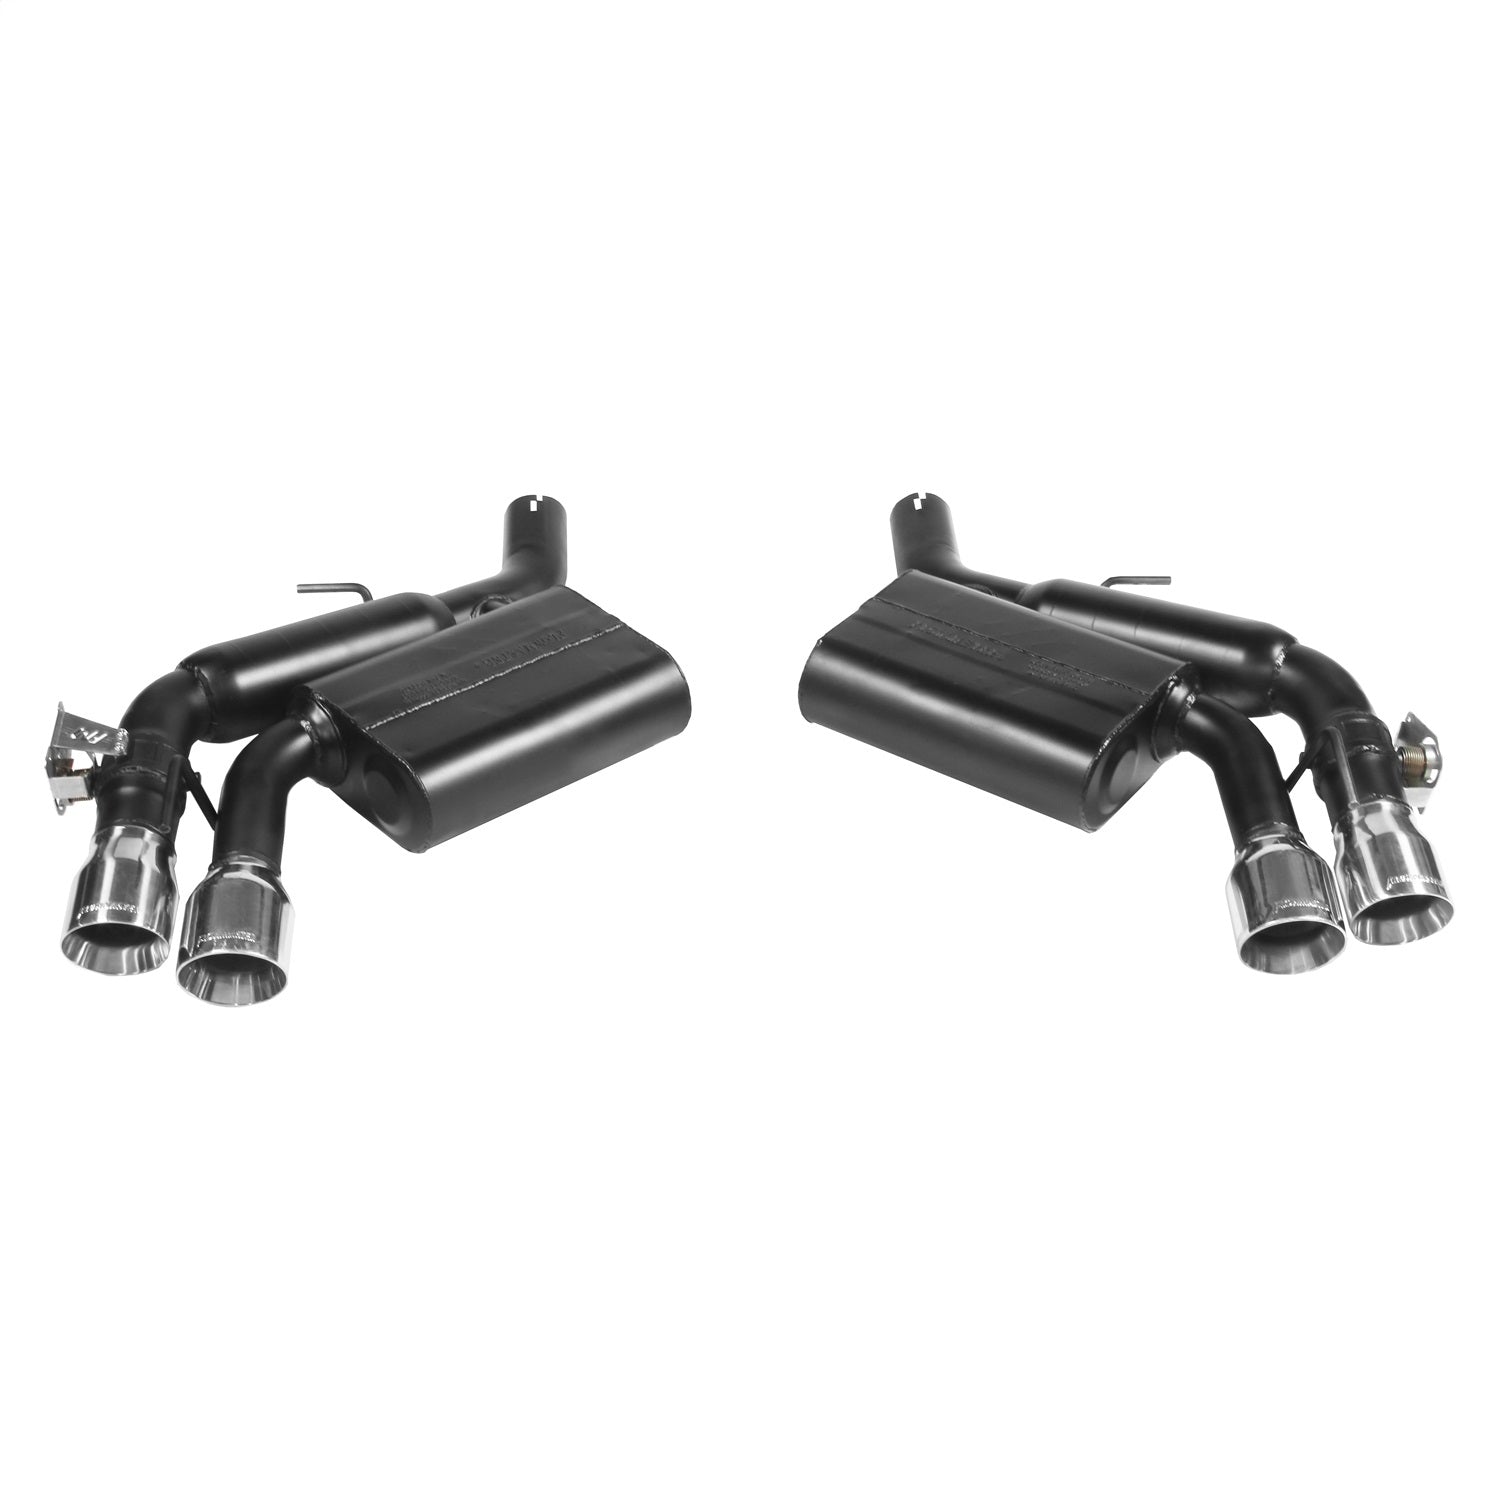 Flowmaster 817746 American Thunder Axle Back Exhaust System Fits 16-21 Camaro